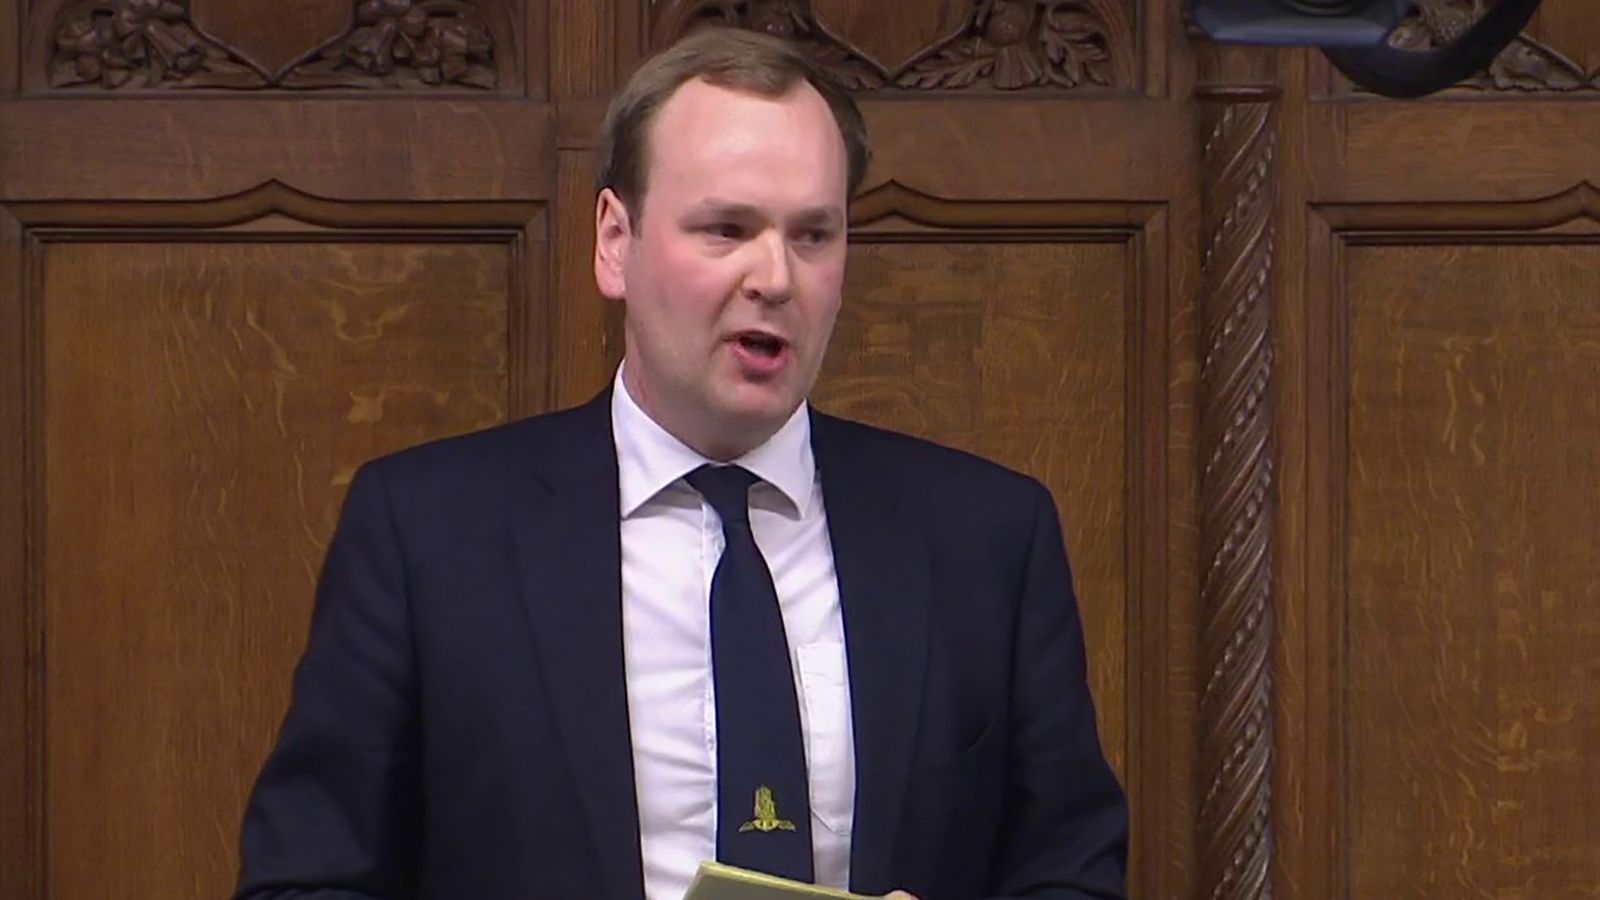 Jeremy Hunt praises William Wragg for 'courageous' apology after admitting to sharing MPs' phone numbers with dating app contact